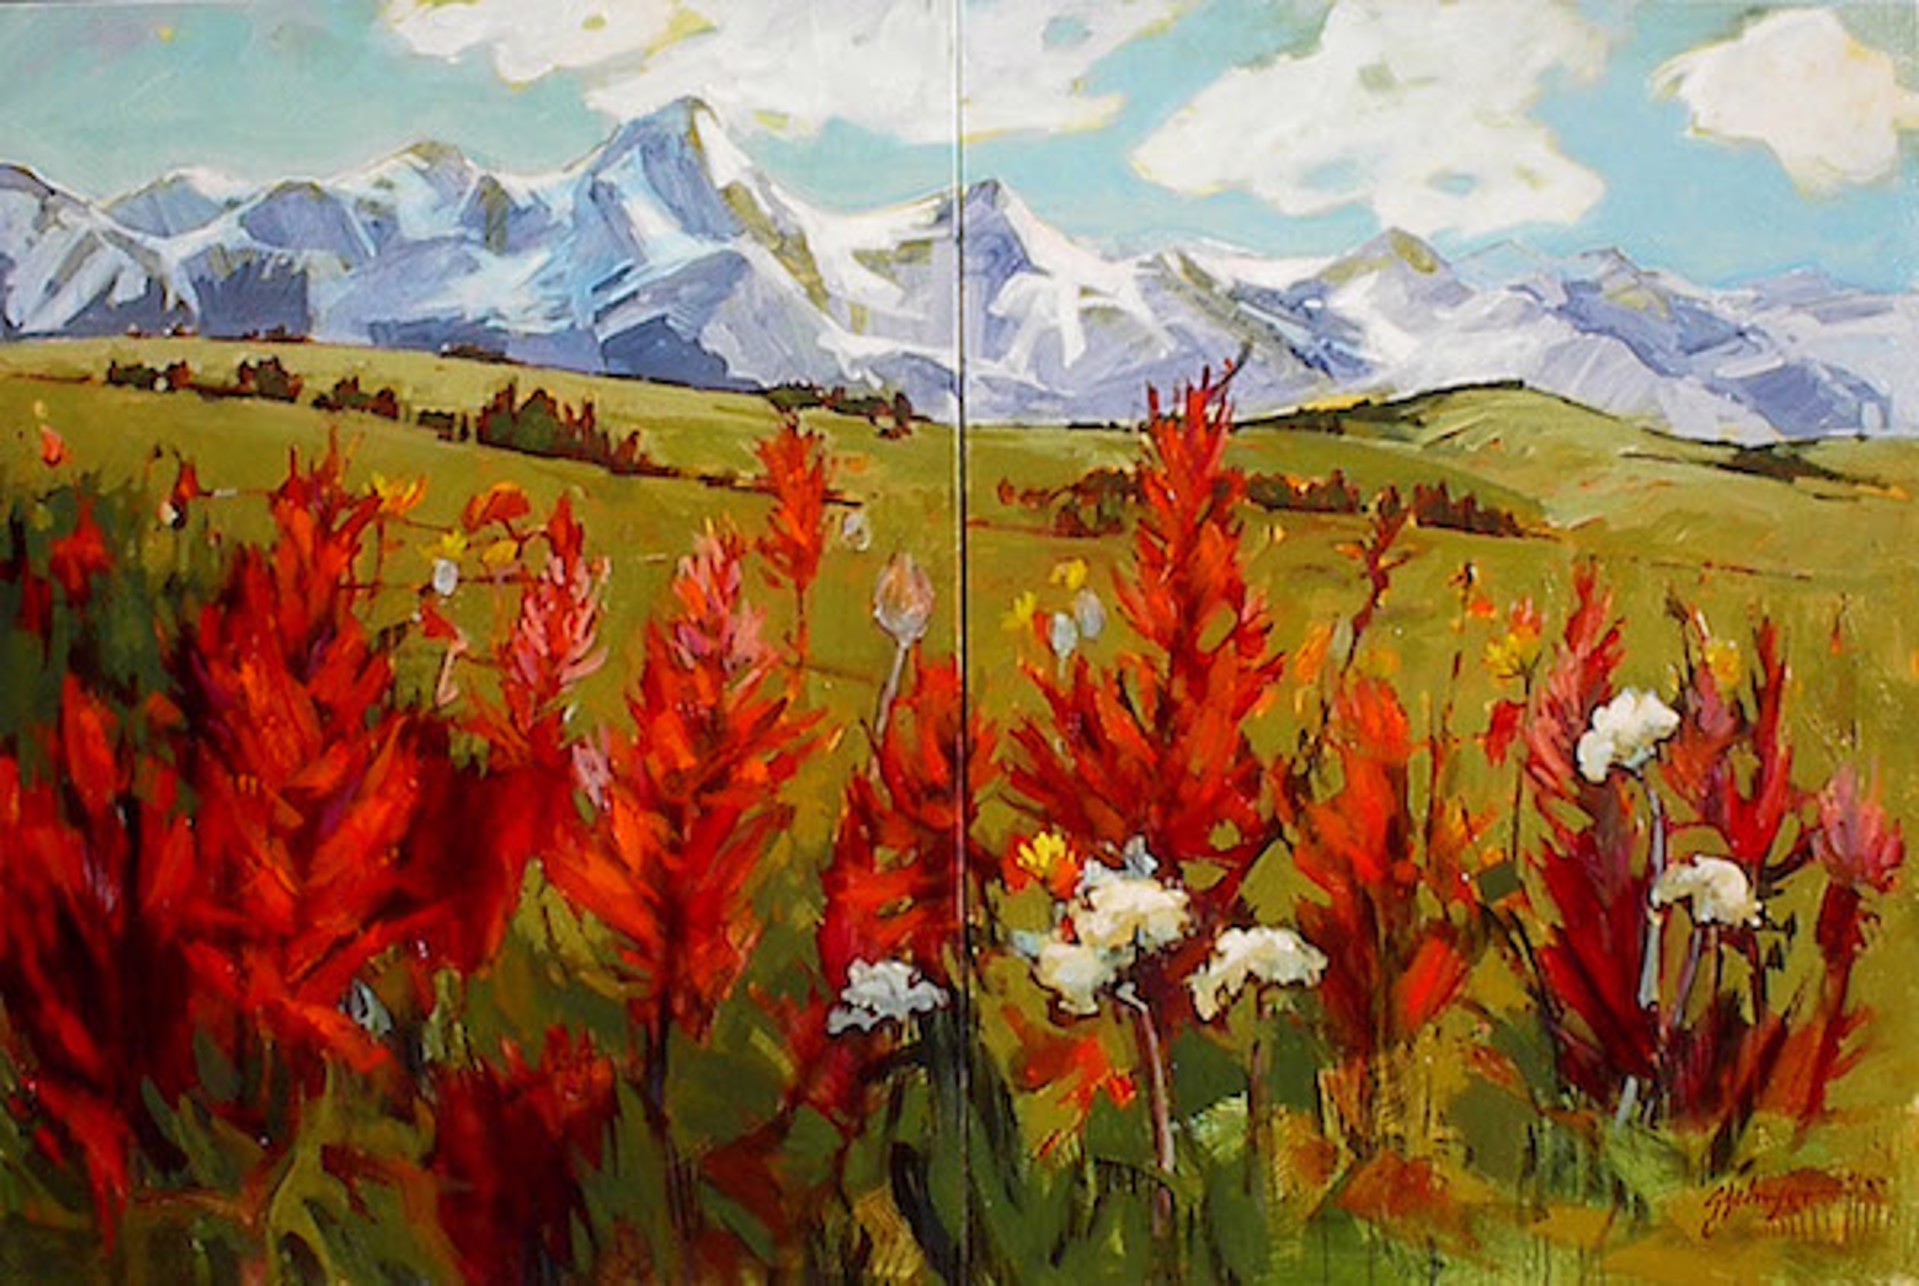 Wildflowers in the Purcells - diptych by Gail Johnson